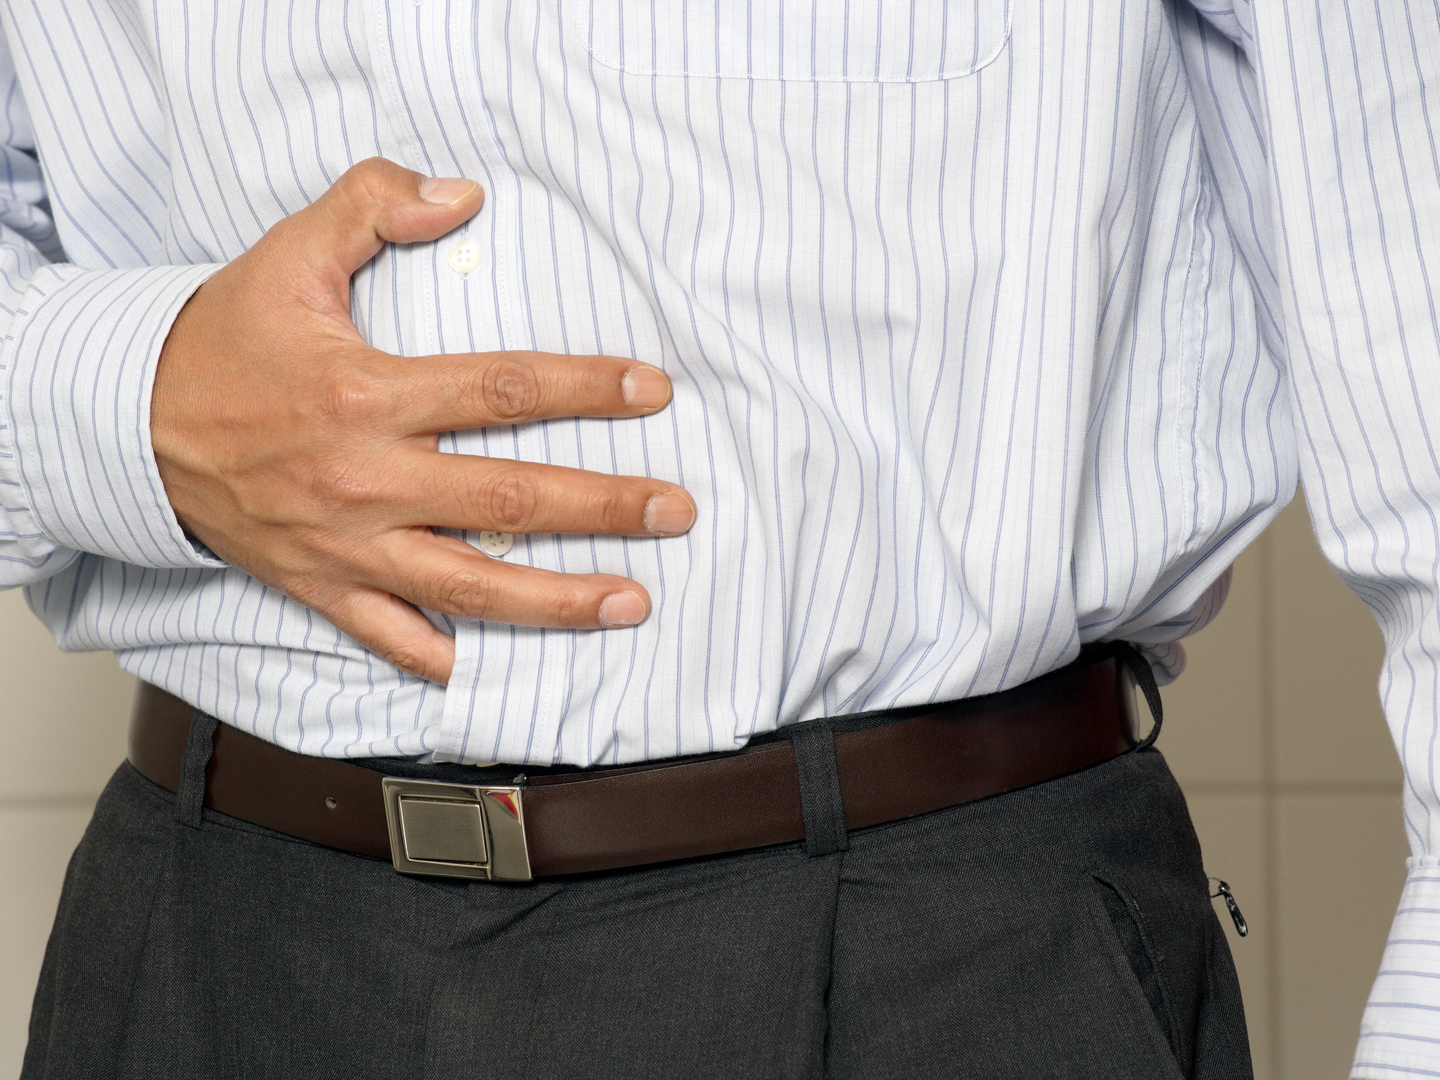 Closeup of a man having stomach pain or indigestion.